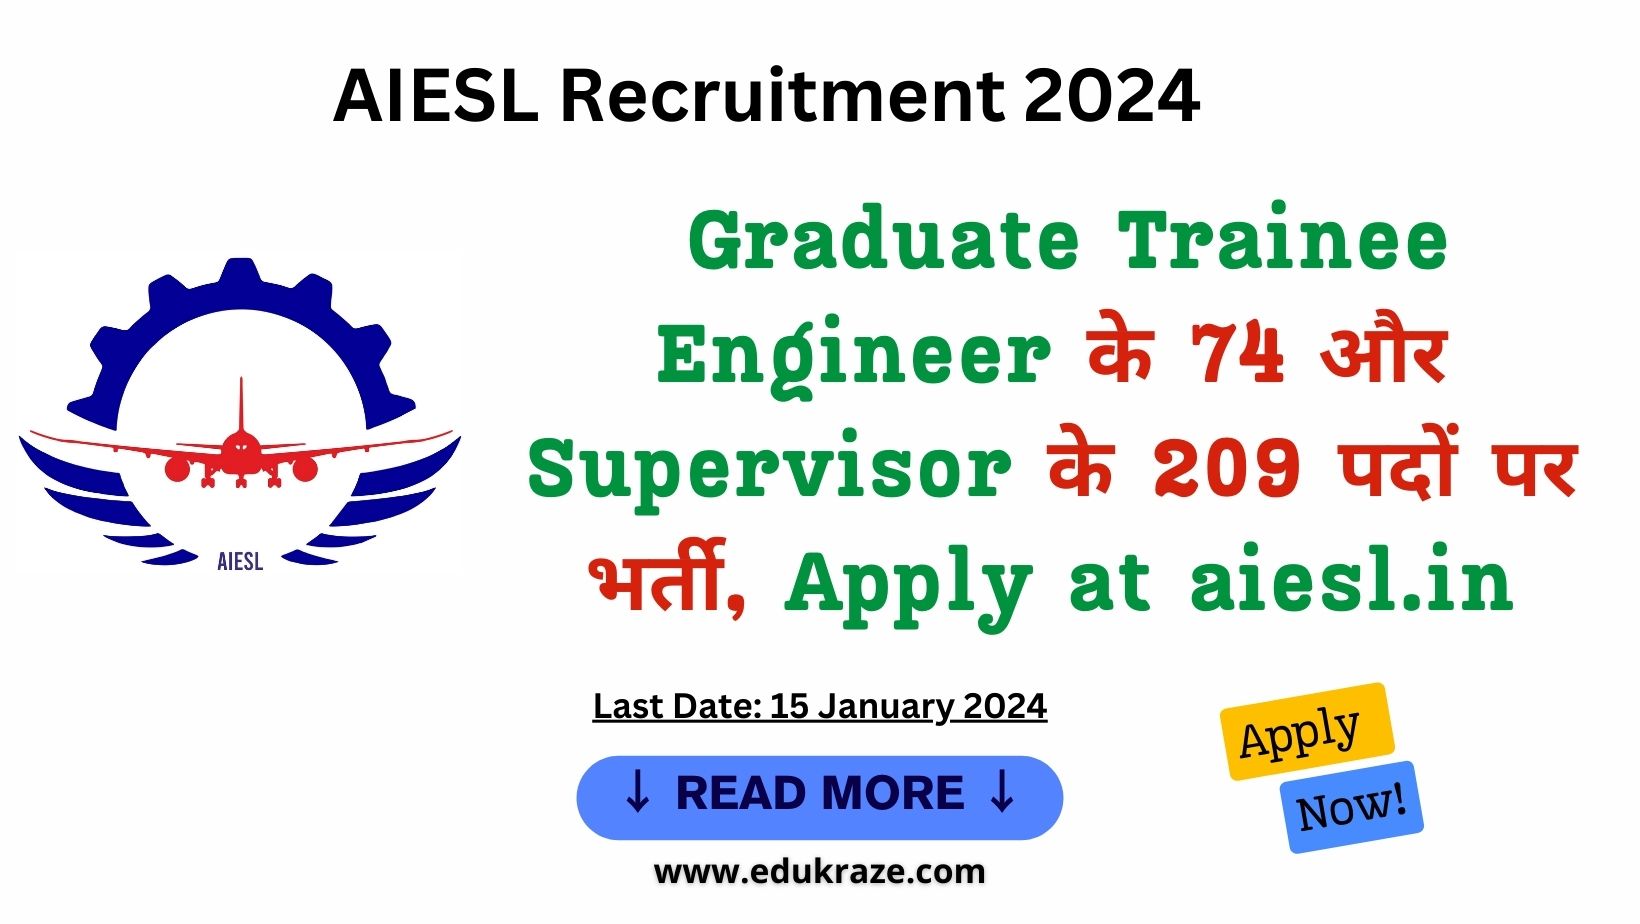 AIESL Recruitment 2024 out for 74 Graduate Trainee Engineer and 209 Supervisor Posts